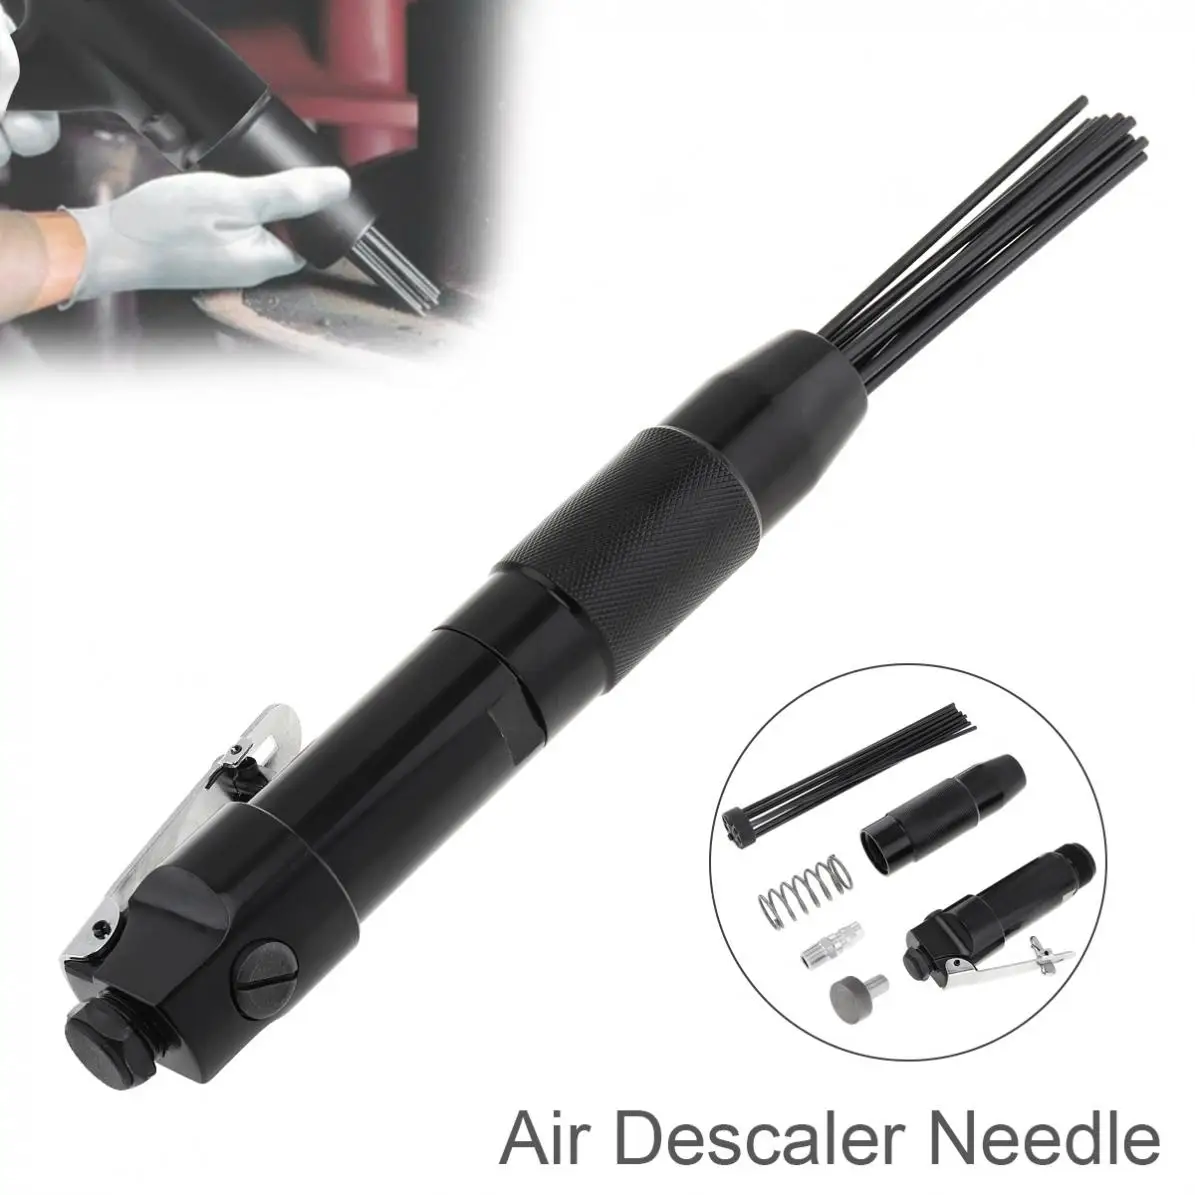 High Carbon Steel 4000rpm Pneumatic Needle Scaler Bundle Deruster Removing Rust Pneumatic Air Shovel with 12 3mm Needles